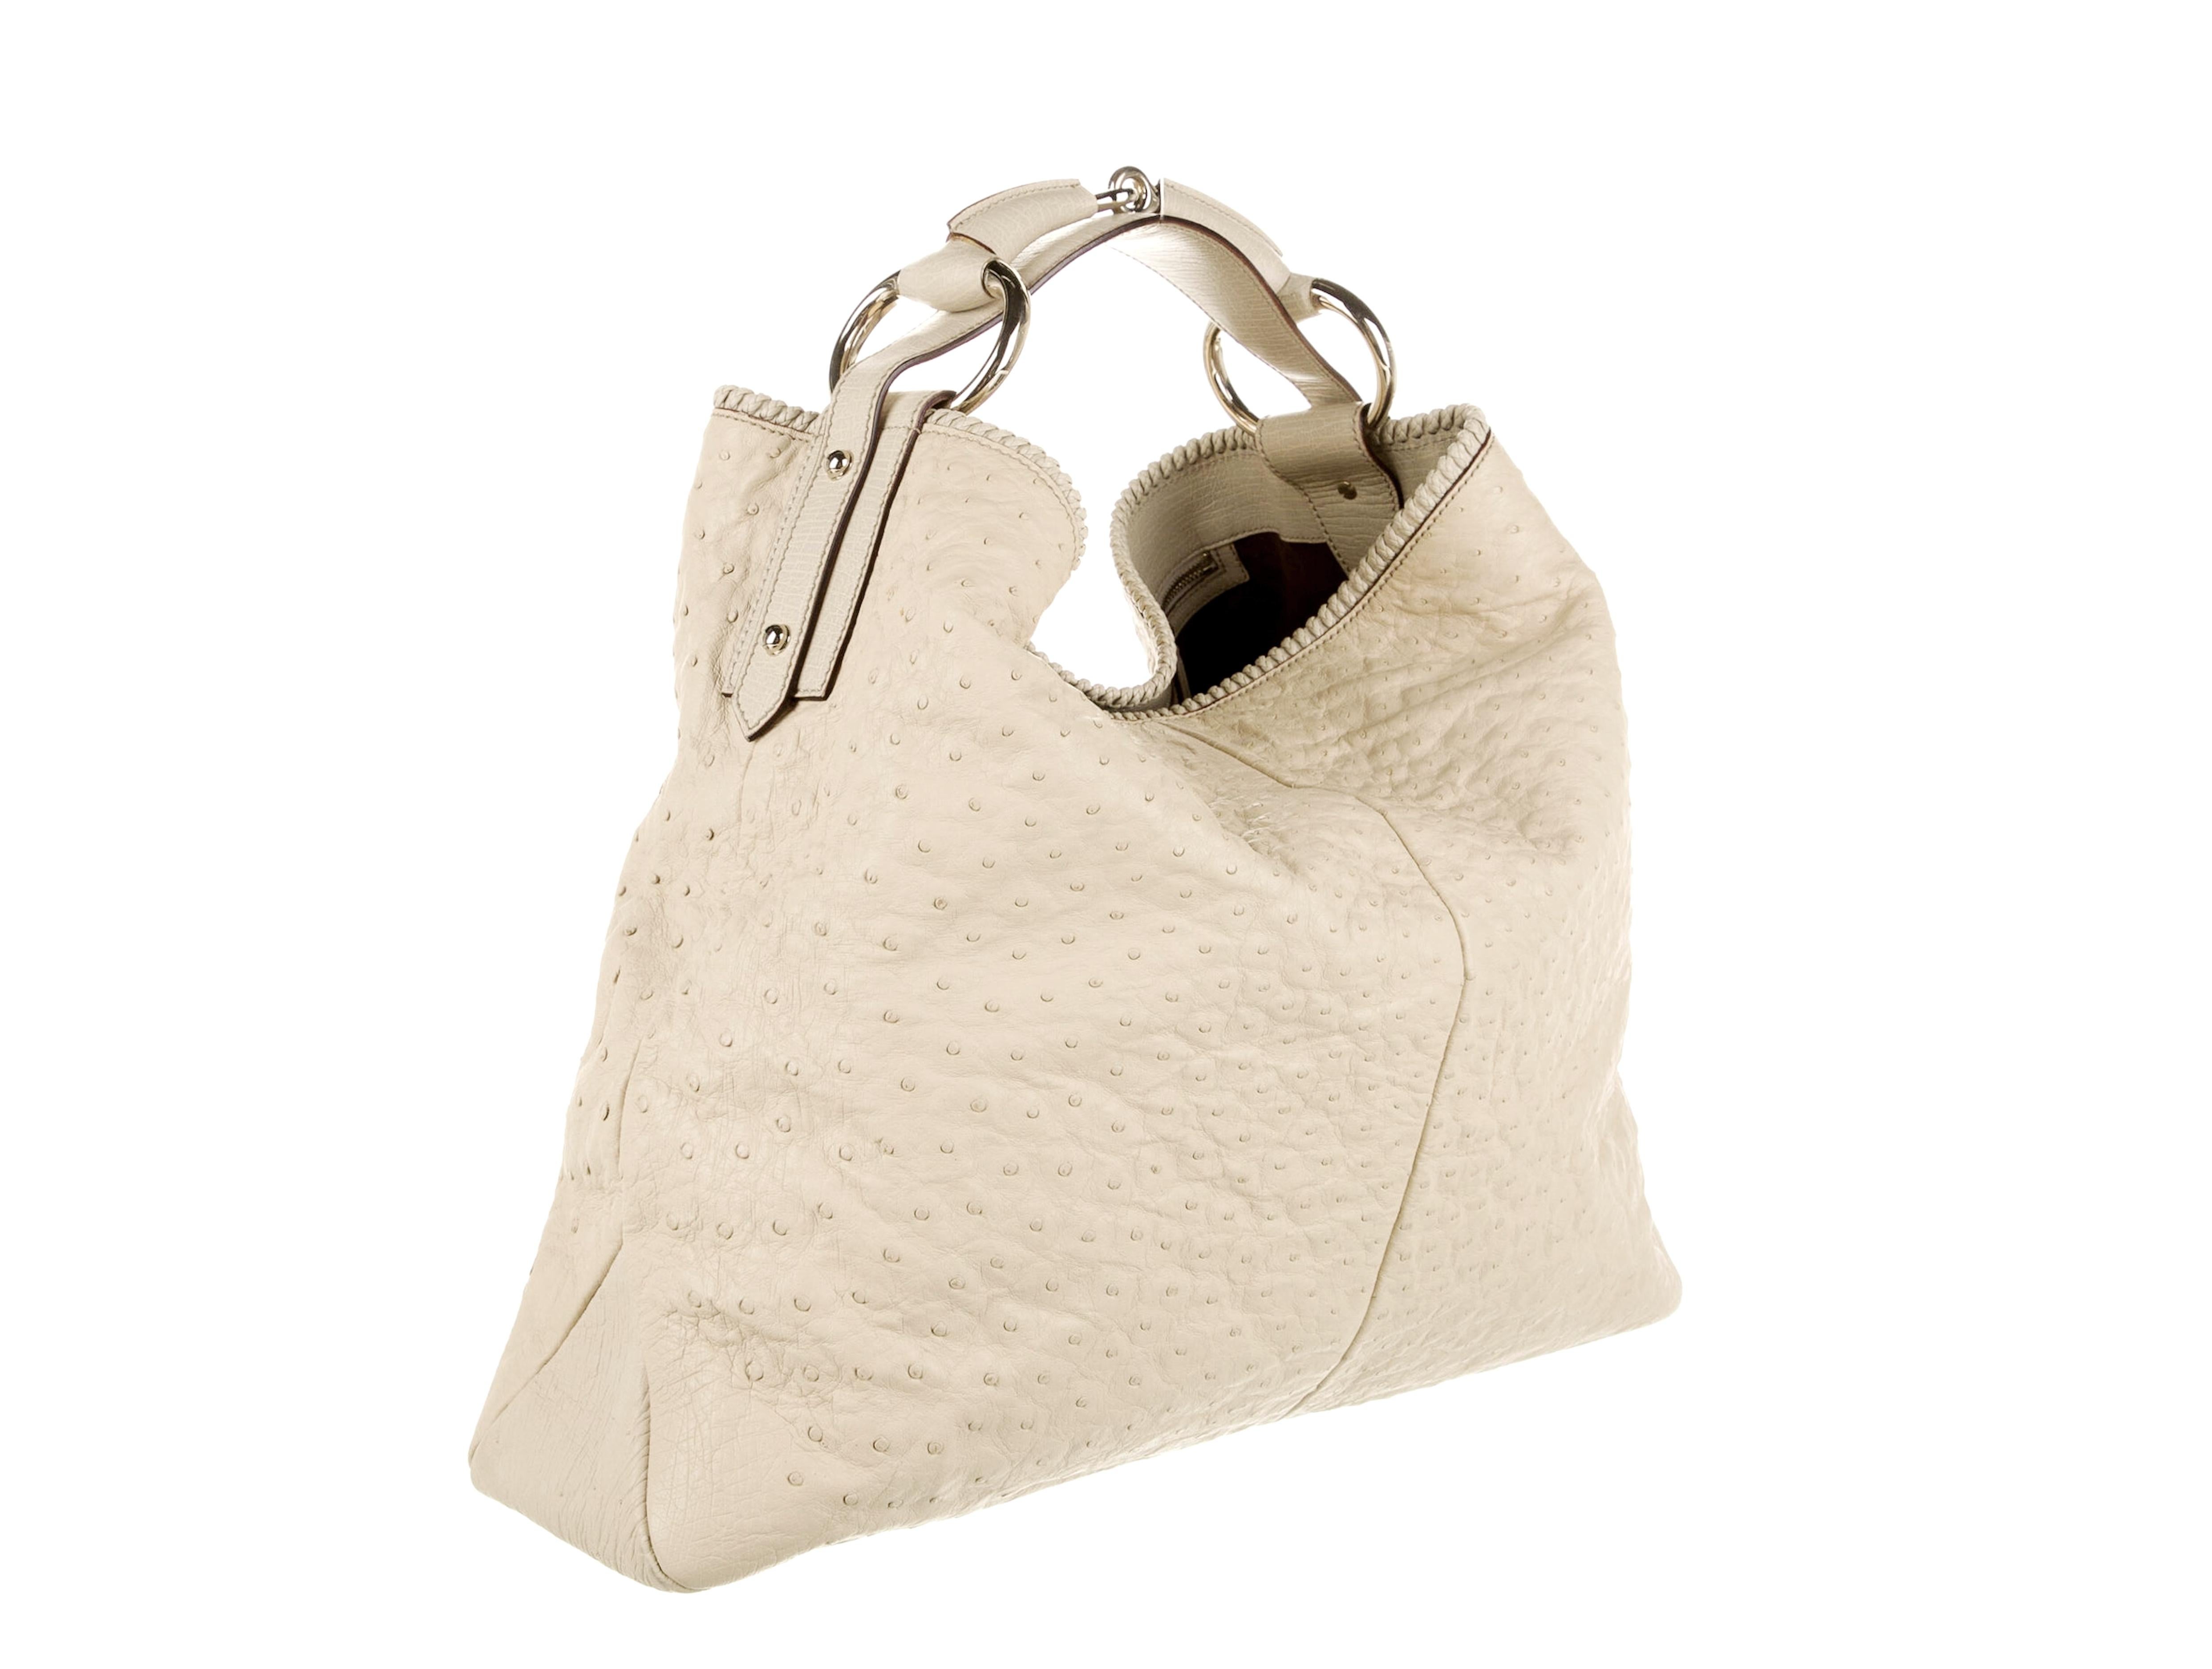 EXTREMELY RARE

GUCCI OSTRICH HOBO BAG
XL SIZE
LIMITED EDITON - ONLY VERY FEW PIECES WERE PRODUCED OF THIS GORGEOUS BAG AND SOLD IN FLAGSHIP STORES TO A SELECTED CLIENTELE

DETAILS: 
A GUCCI signature piece that will last you for many years
Timeless